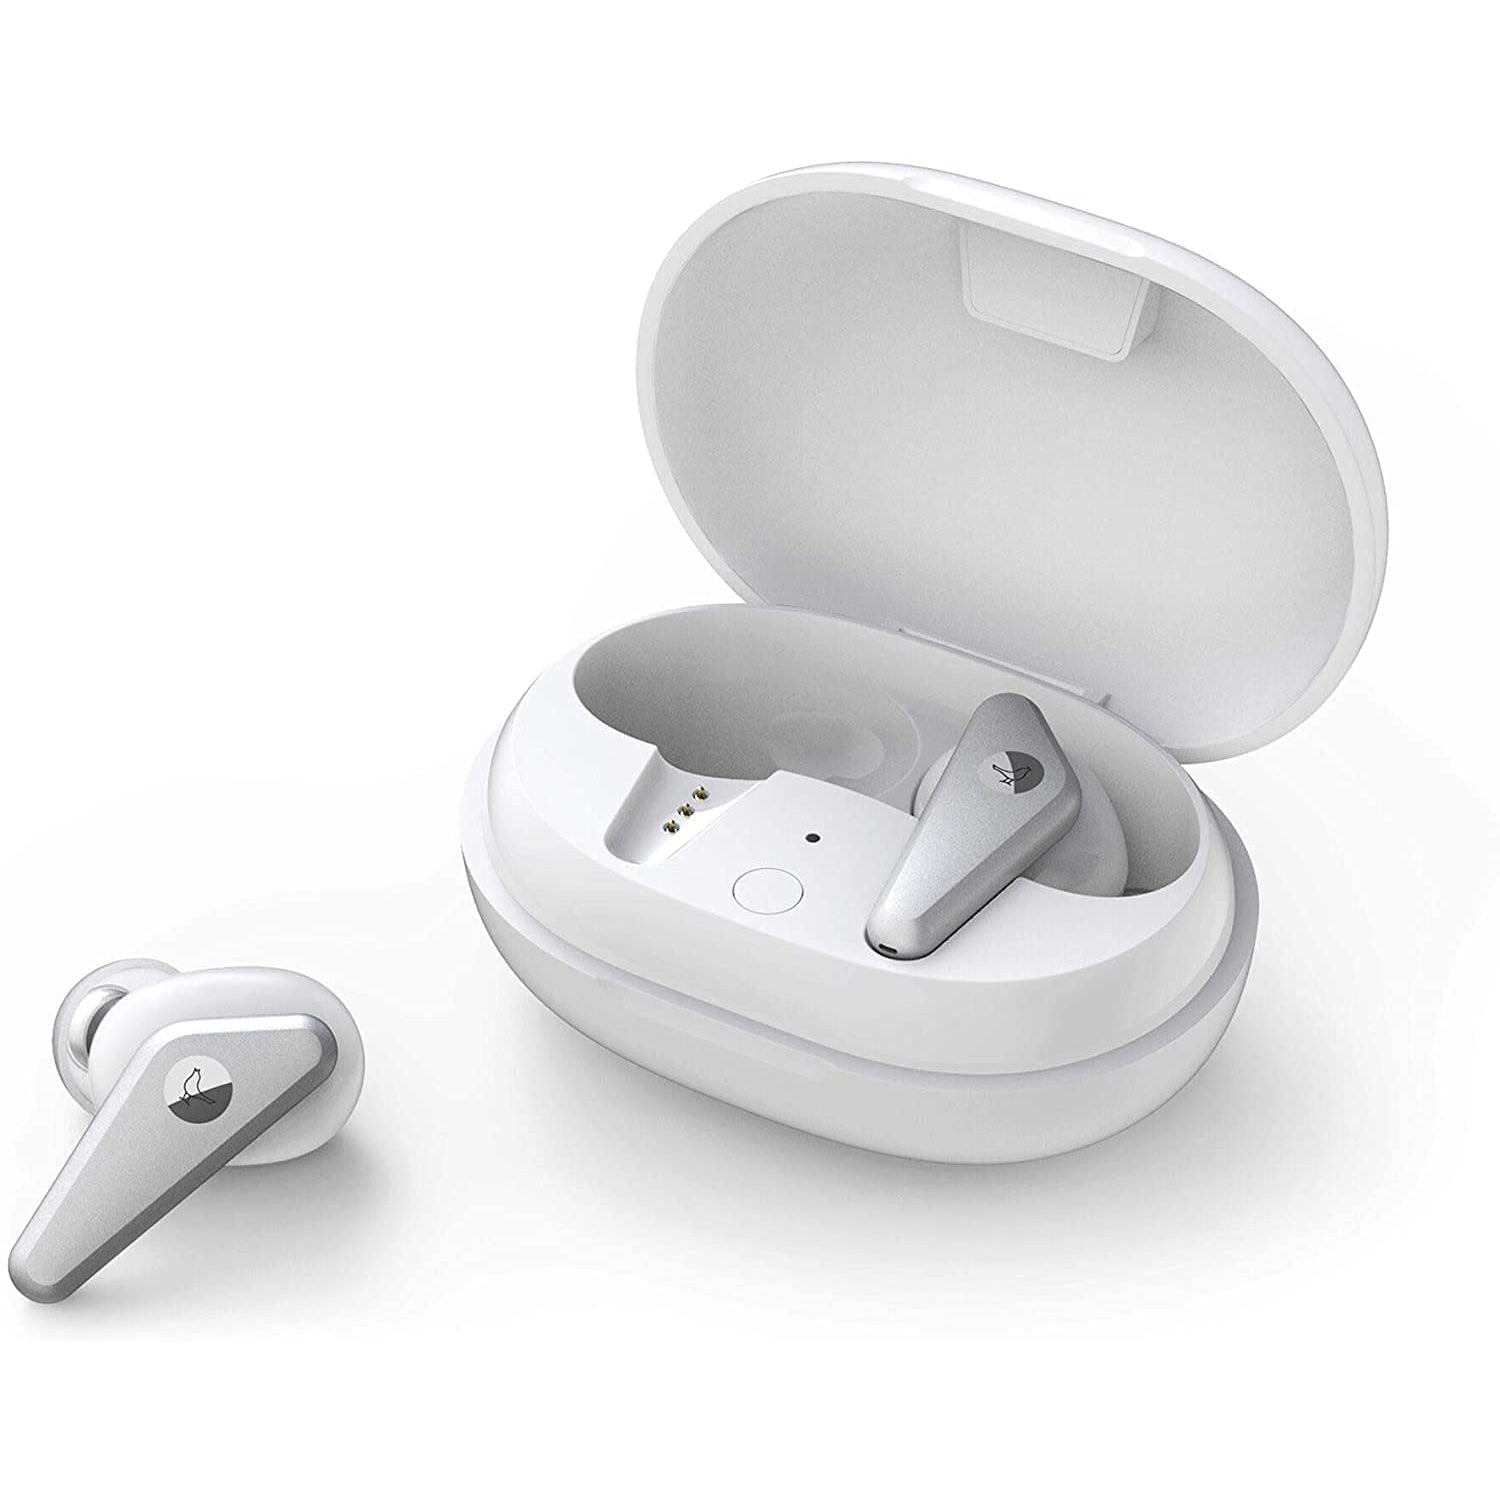 Libratone TRACK Air+ true wireless earbuds smart noise cancelling (24h of battery - 6h ear buds / 18h charging case